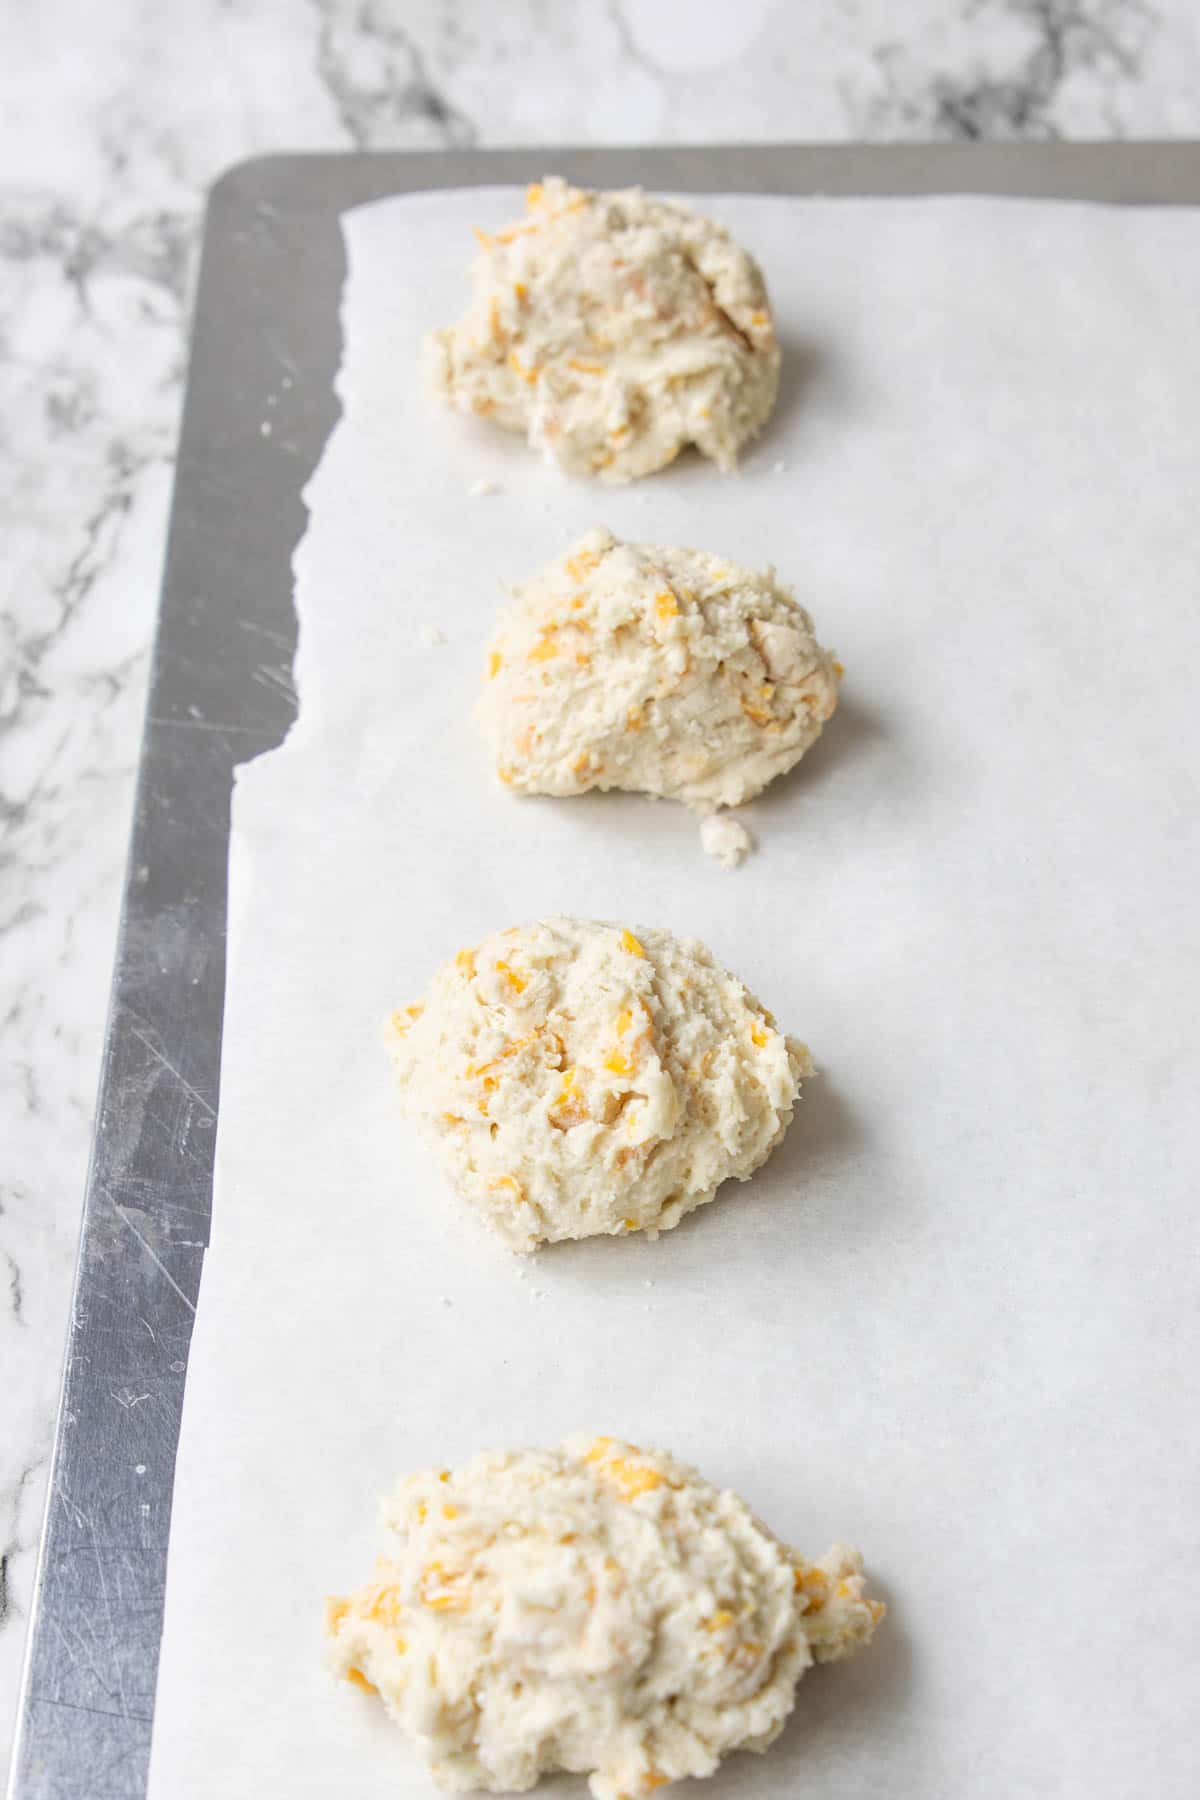 garlic cheddar biscuits dropped on a cookie sheet lined with parchment